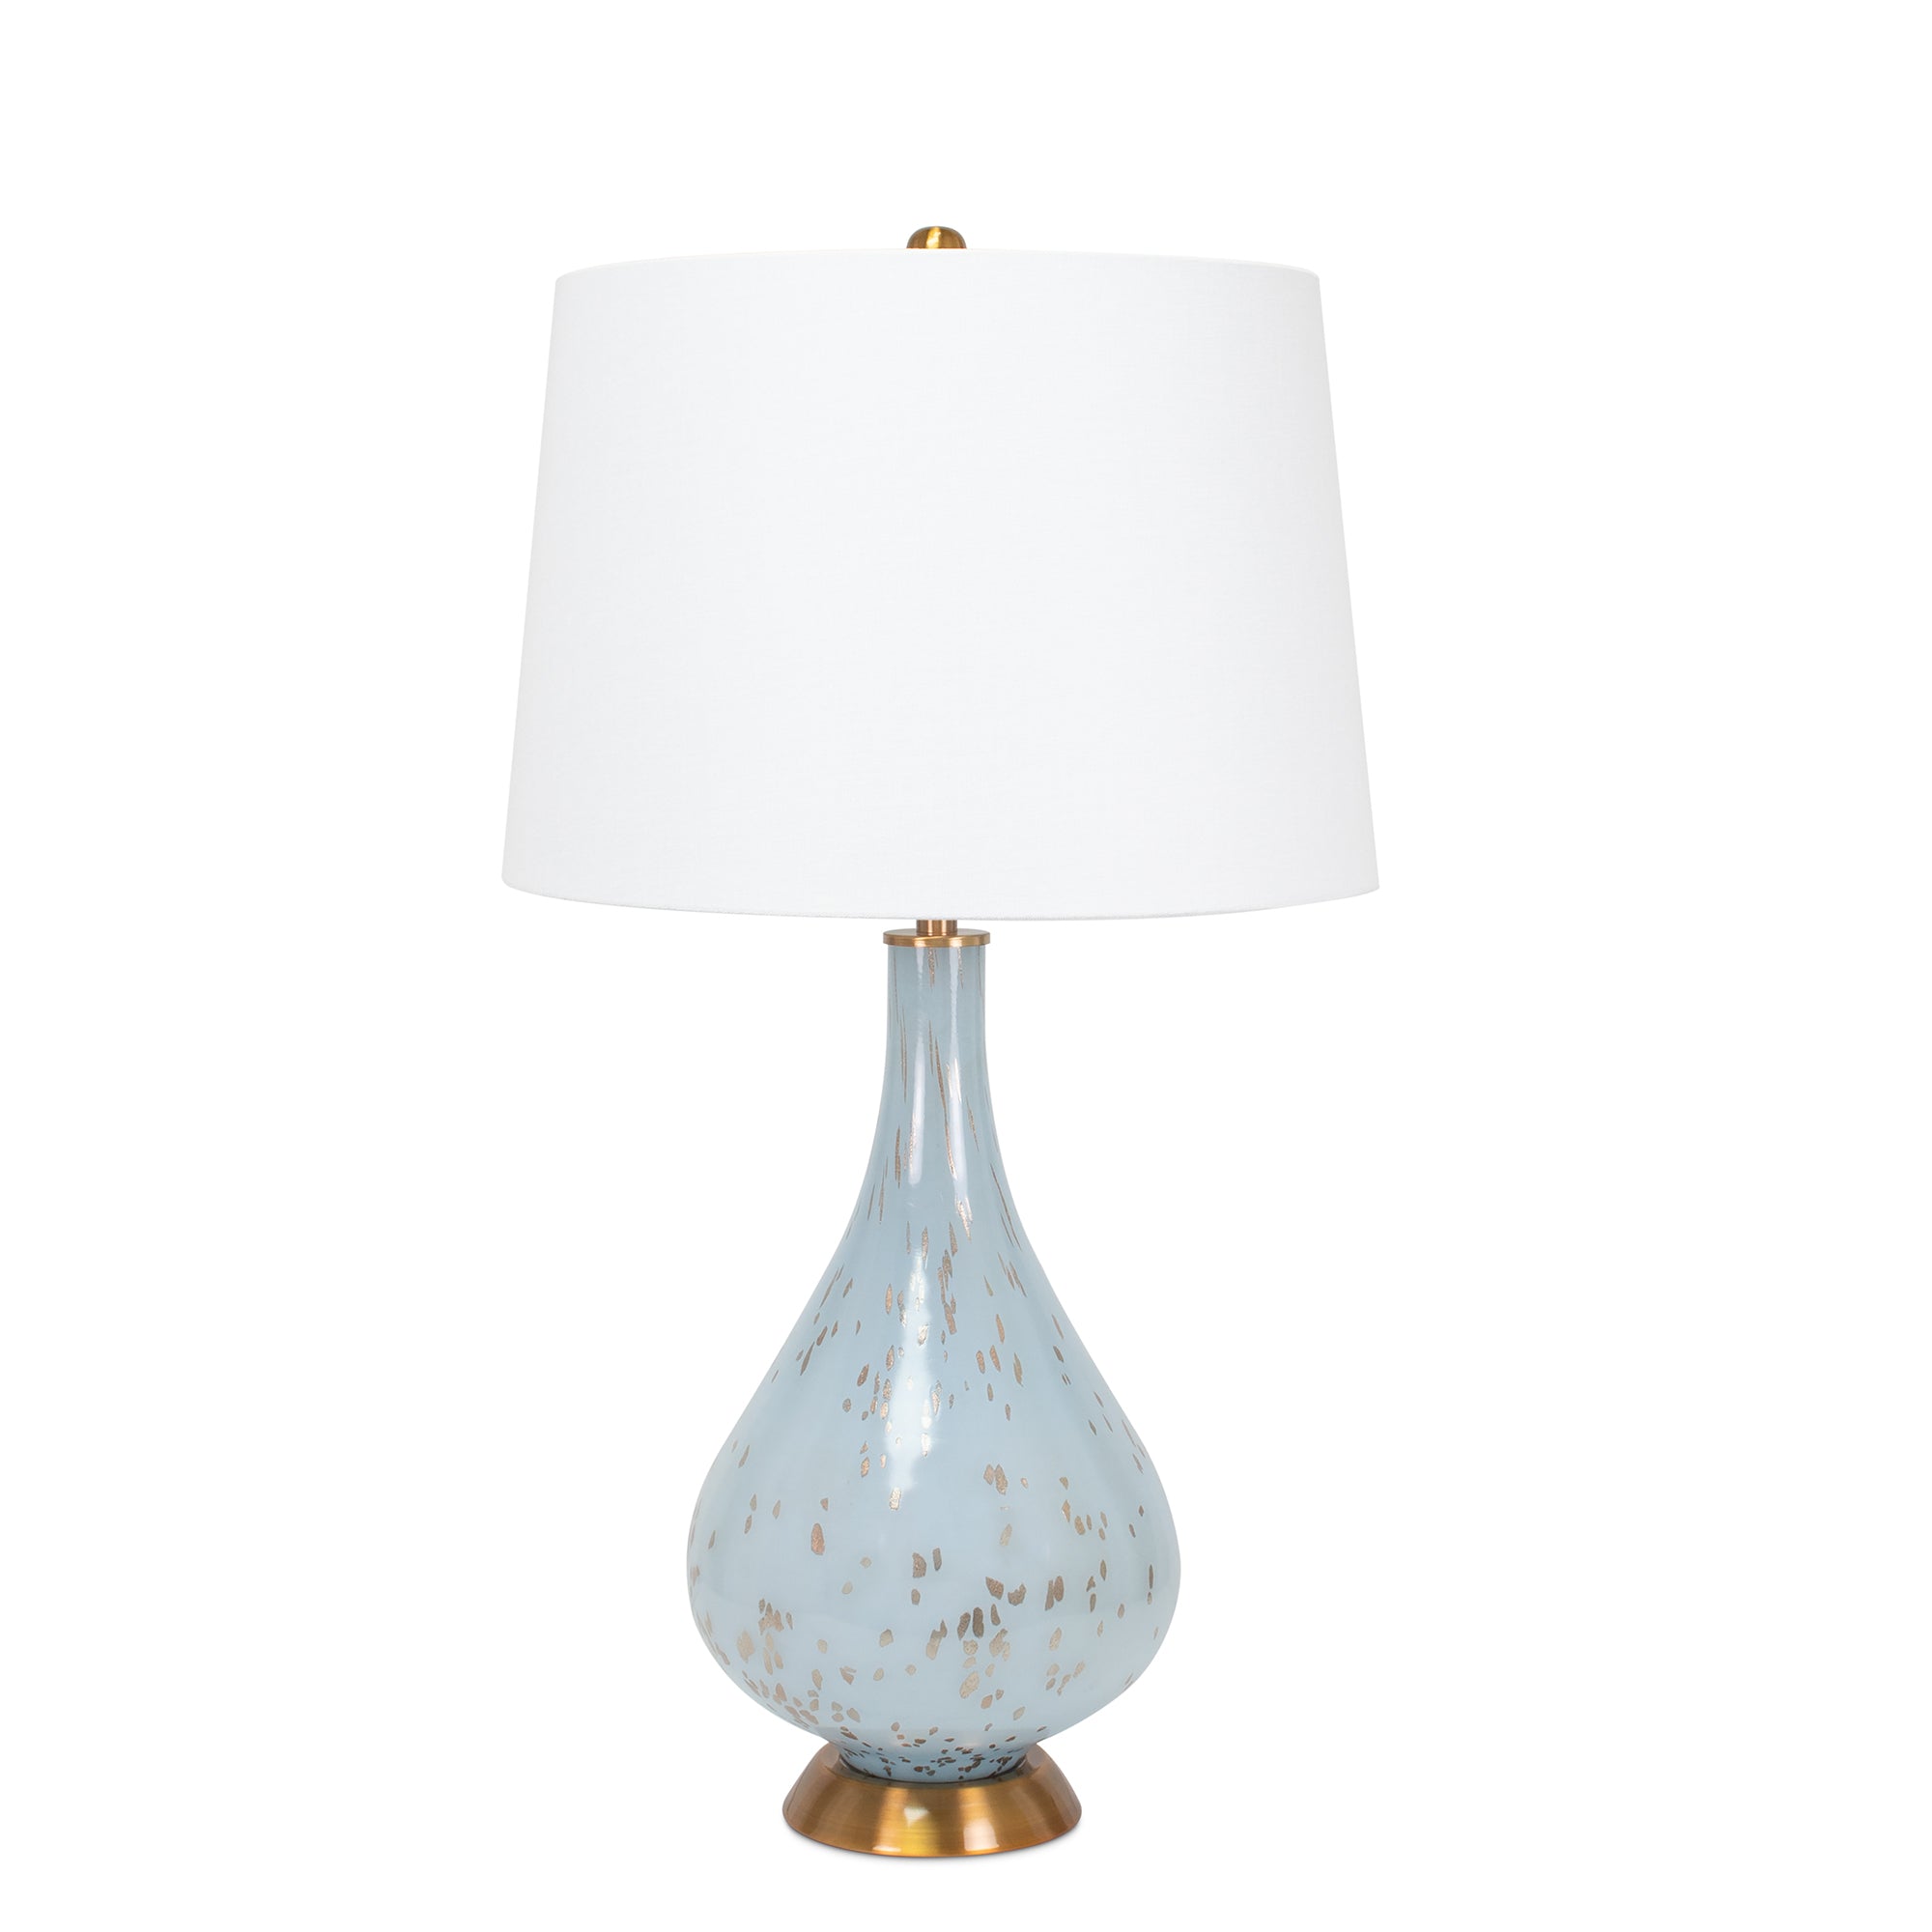 Luca Table Lamp - Couture Lamps